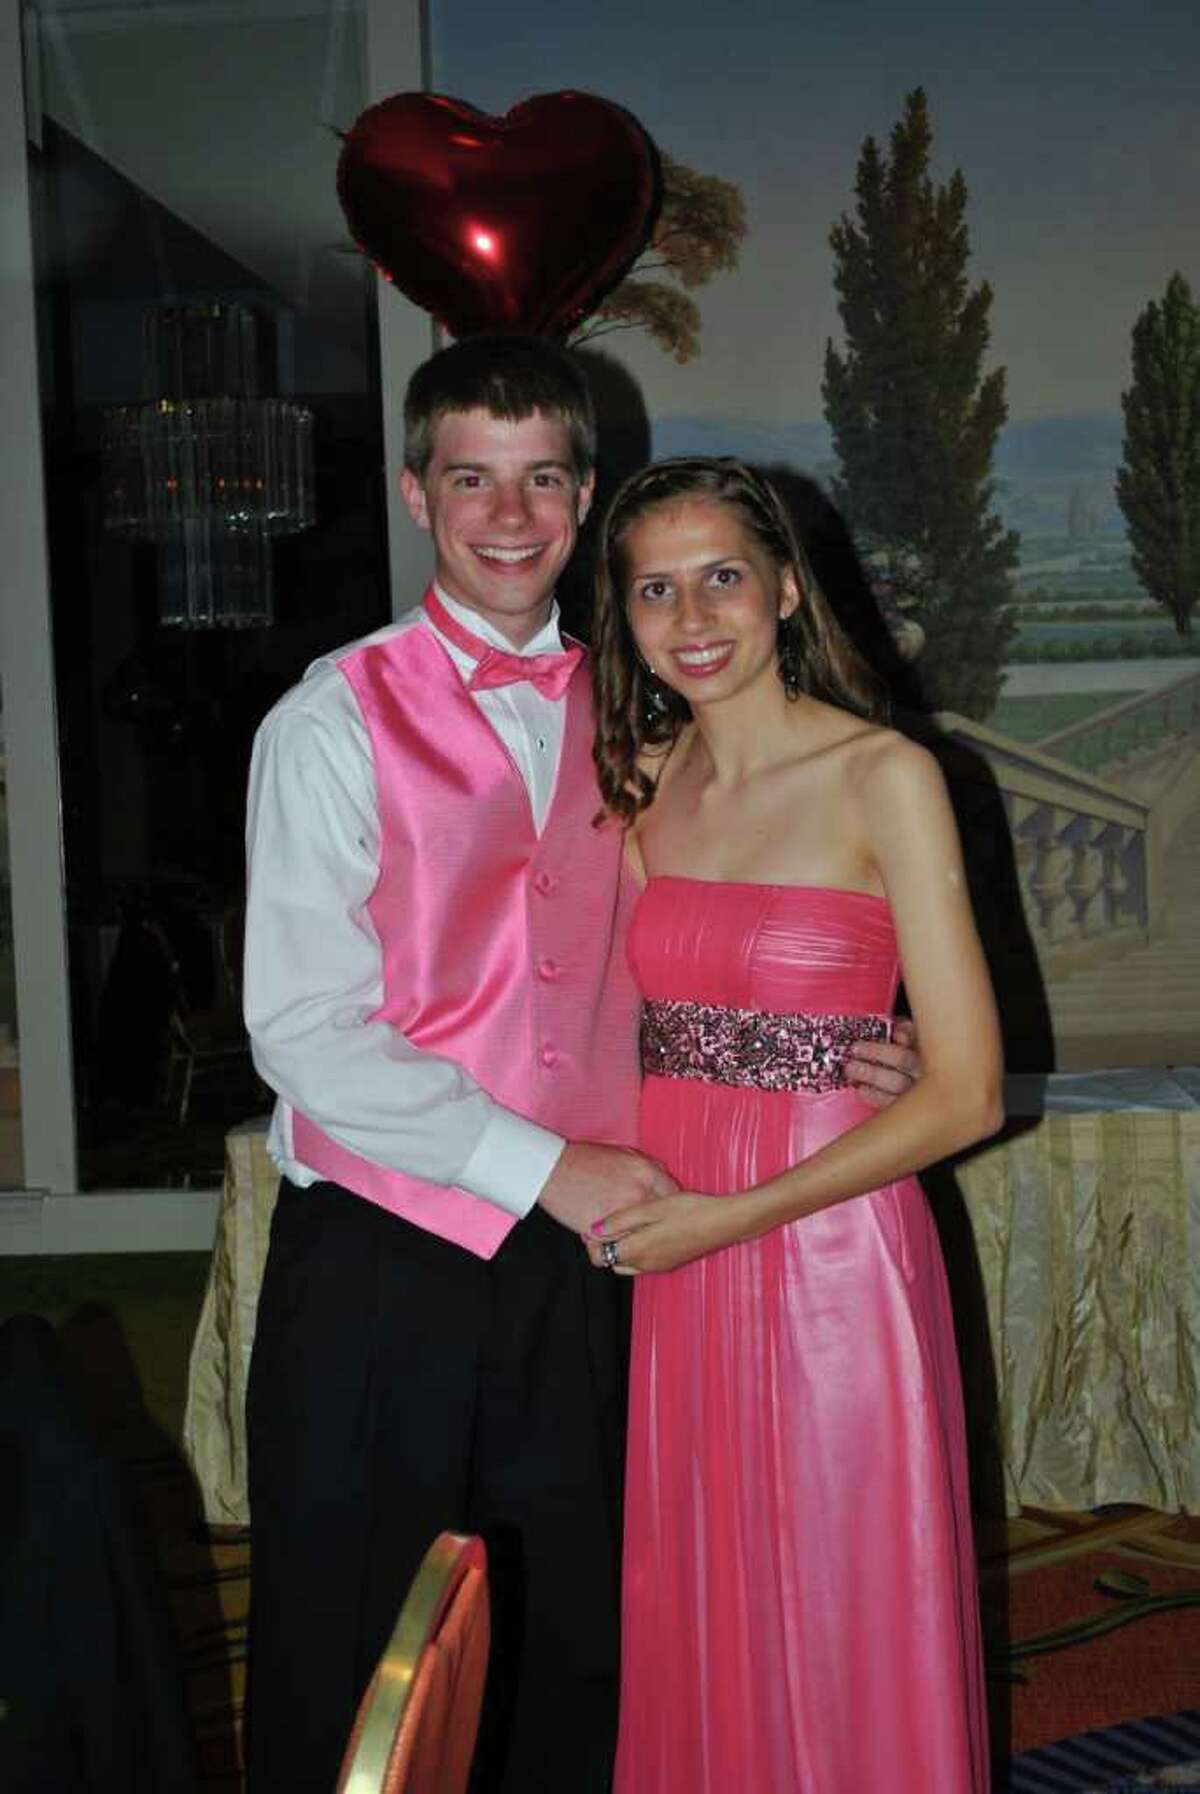 Fairlfield Prep had their prom on May 27, 2011 at the Stamford Marriott.